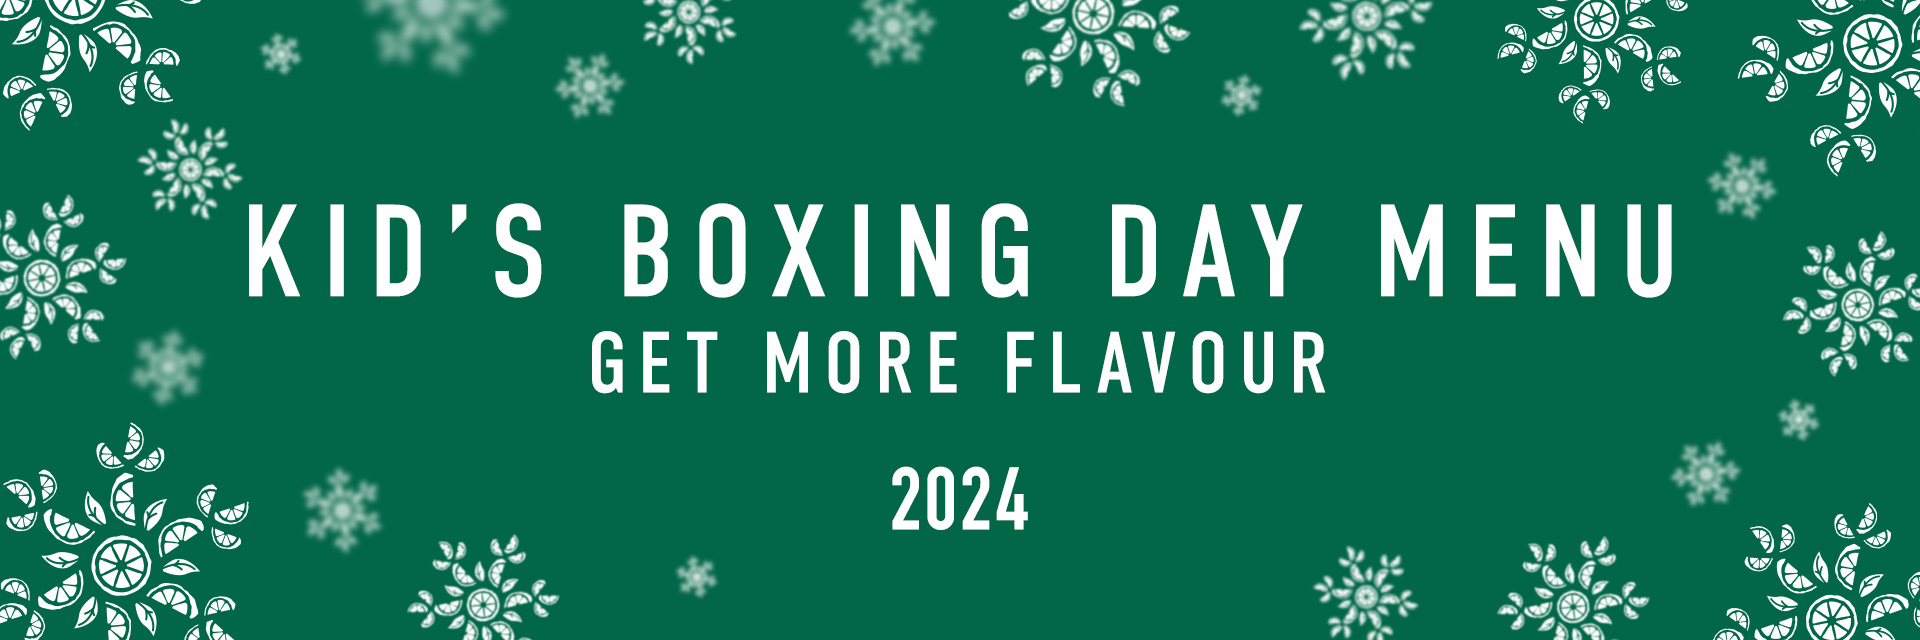 The Two Rivers Kids Boxing Day Menu  - Harvester 